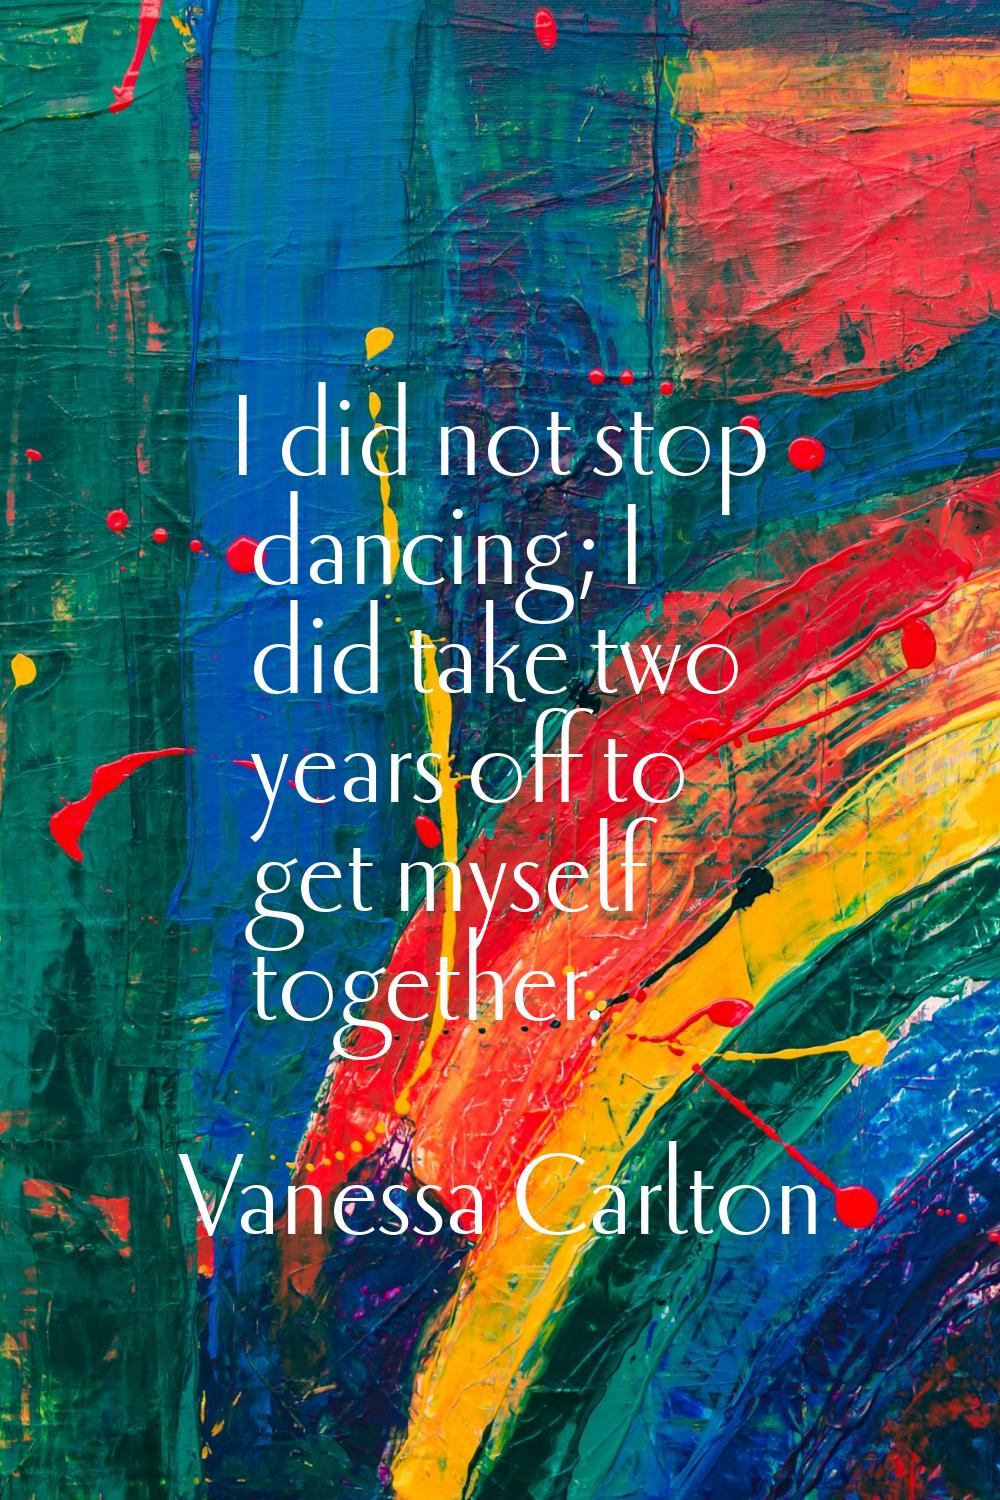 I did not stop dancing; I did take two years off to get myself together.